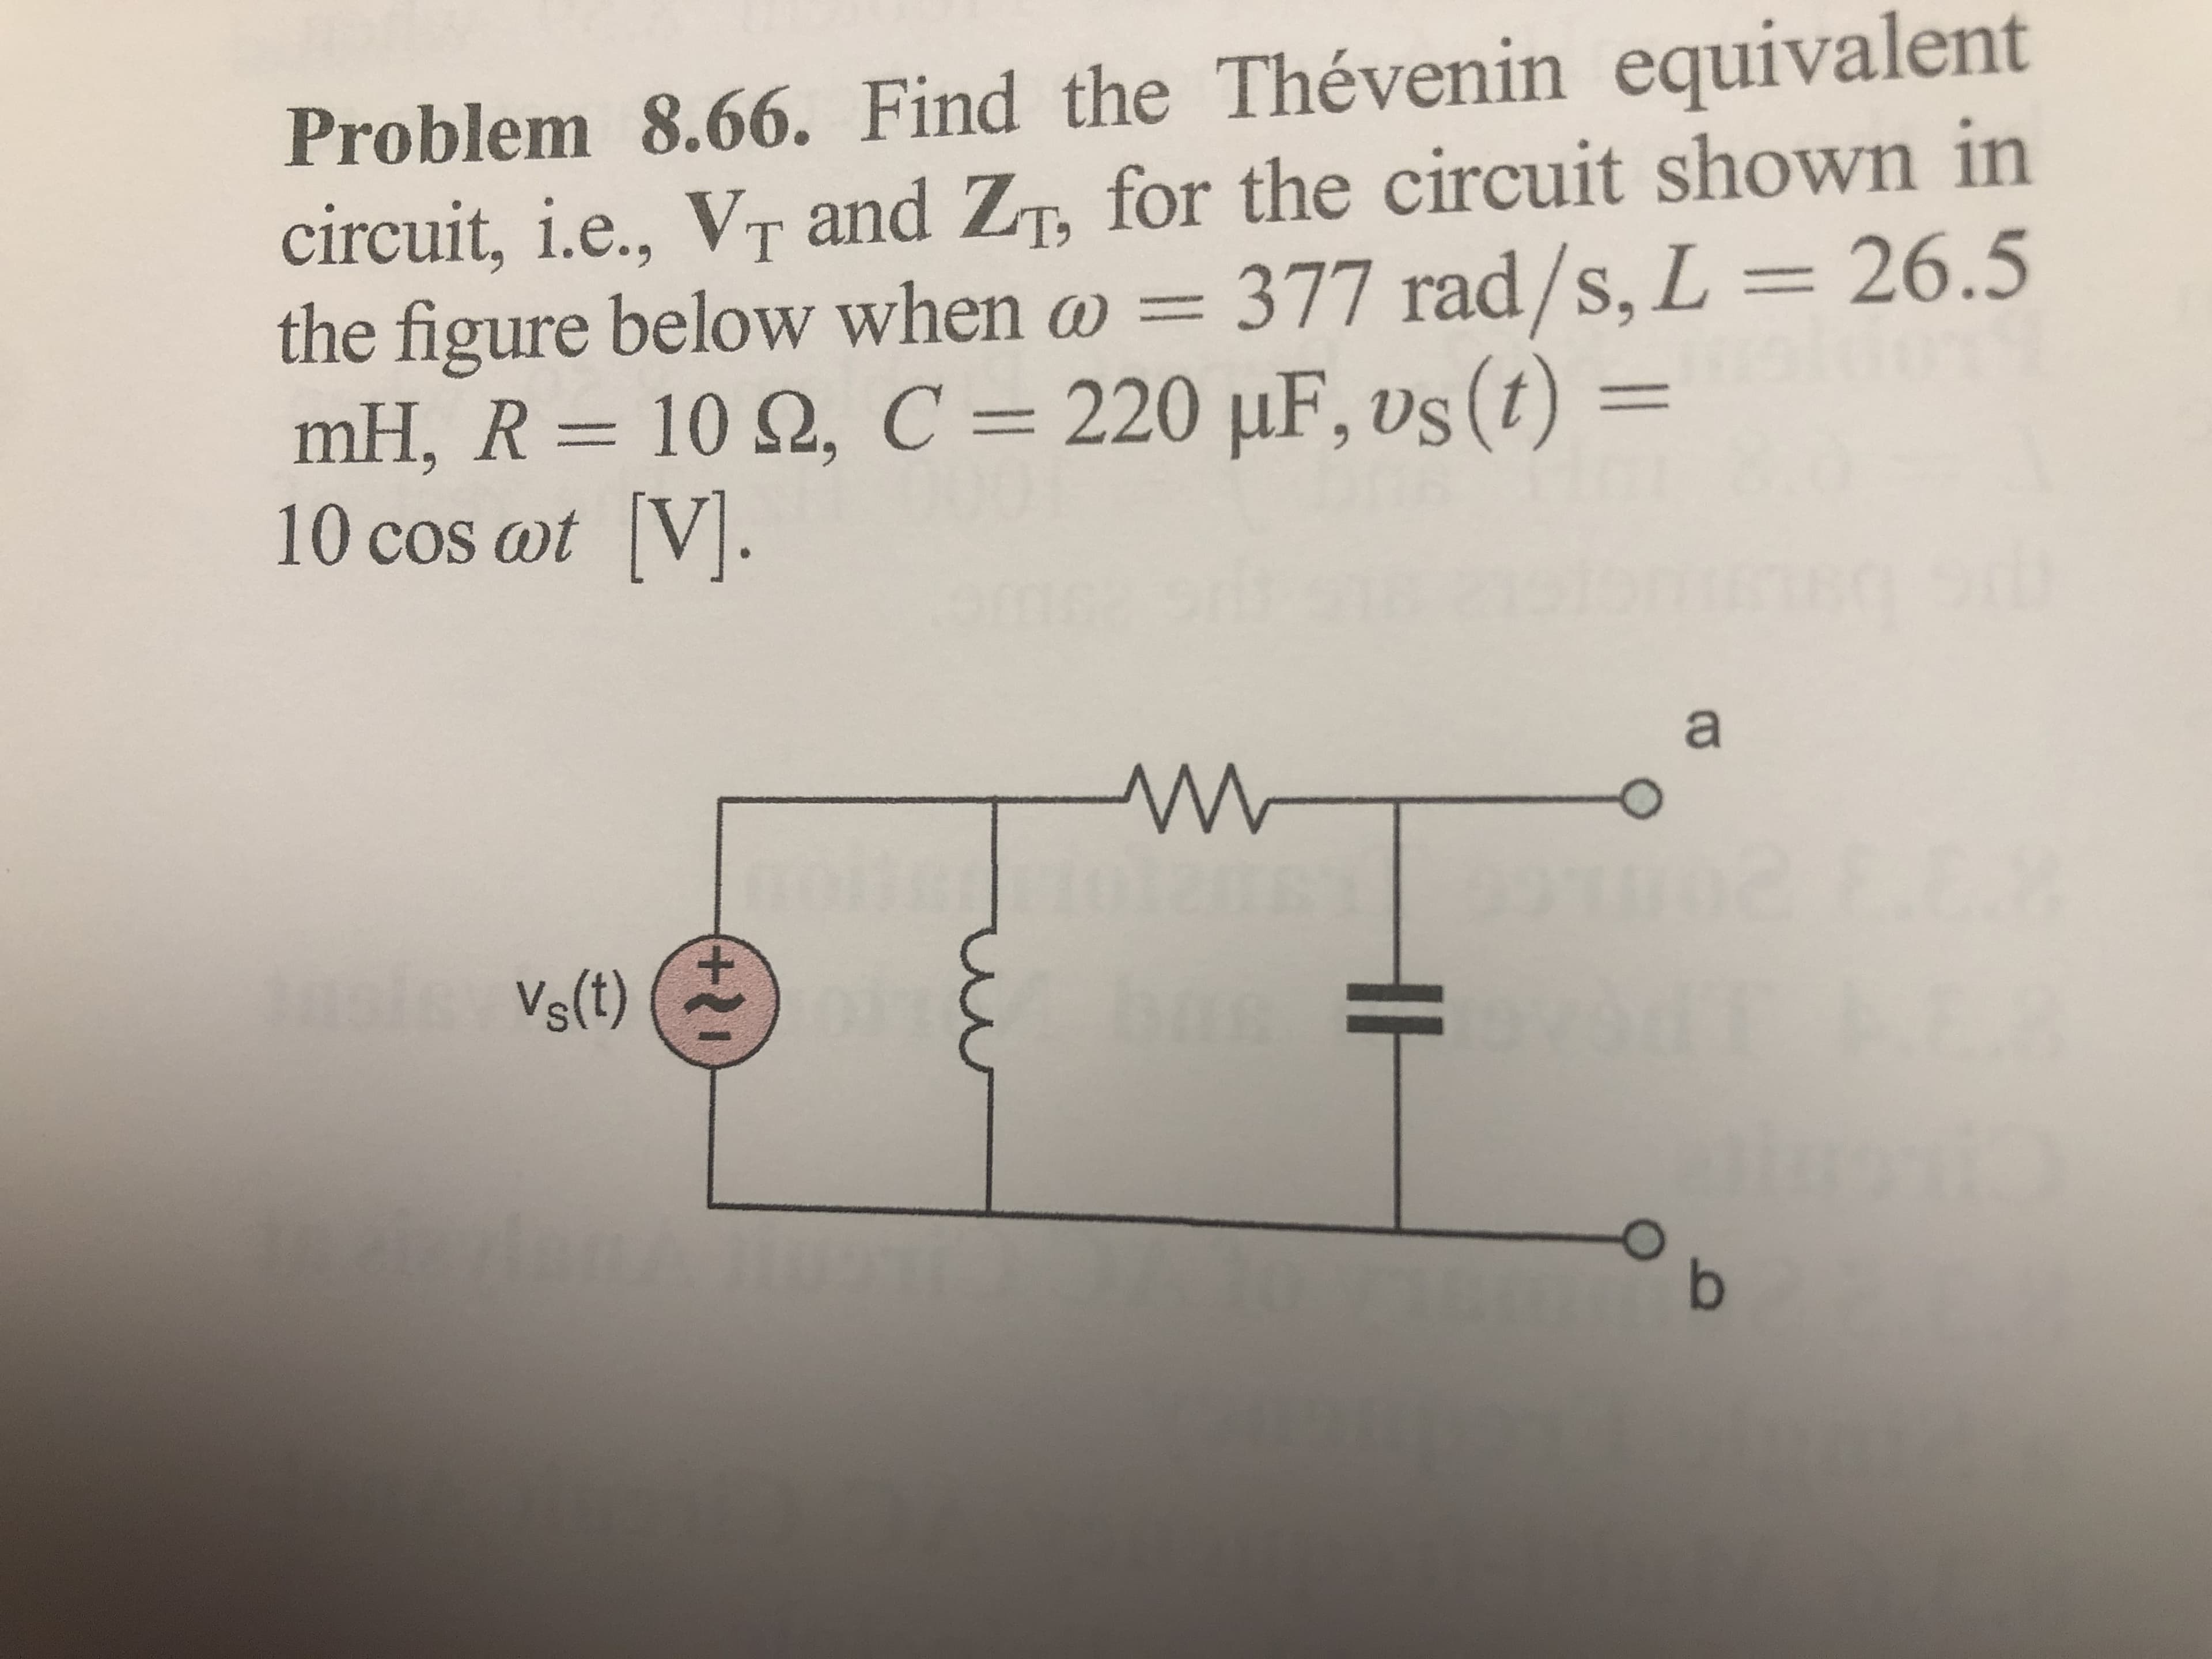 Problem 8.66. Find the Thévenin equivalent
circuit, i.e., VT and ZT, for the circuit shown in
the figure below when w = 377 rad/s, L = 26.5
mH, R = 10 Q, C = 220 µF, vs(t) =
10 cos ot V.
6.
a
Vs(t) *
